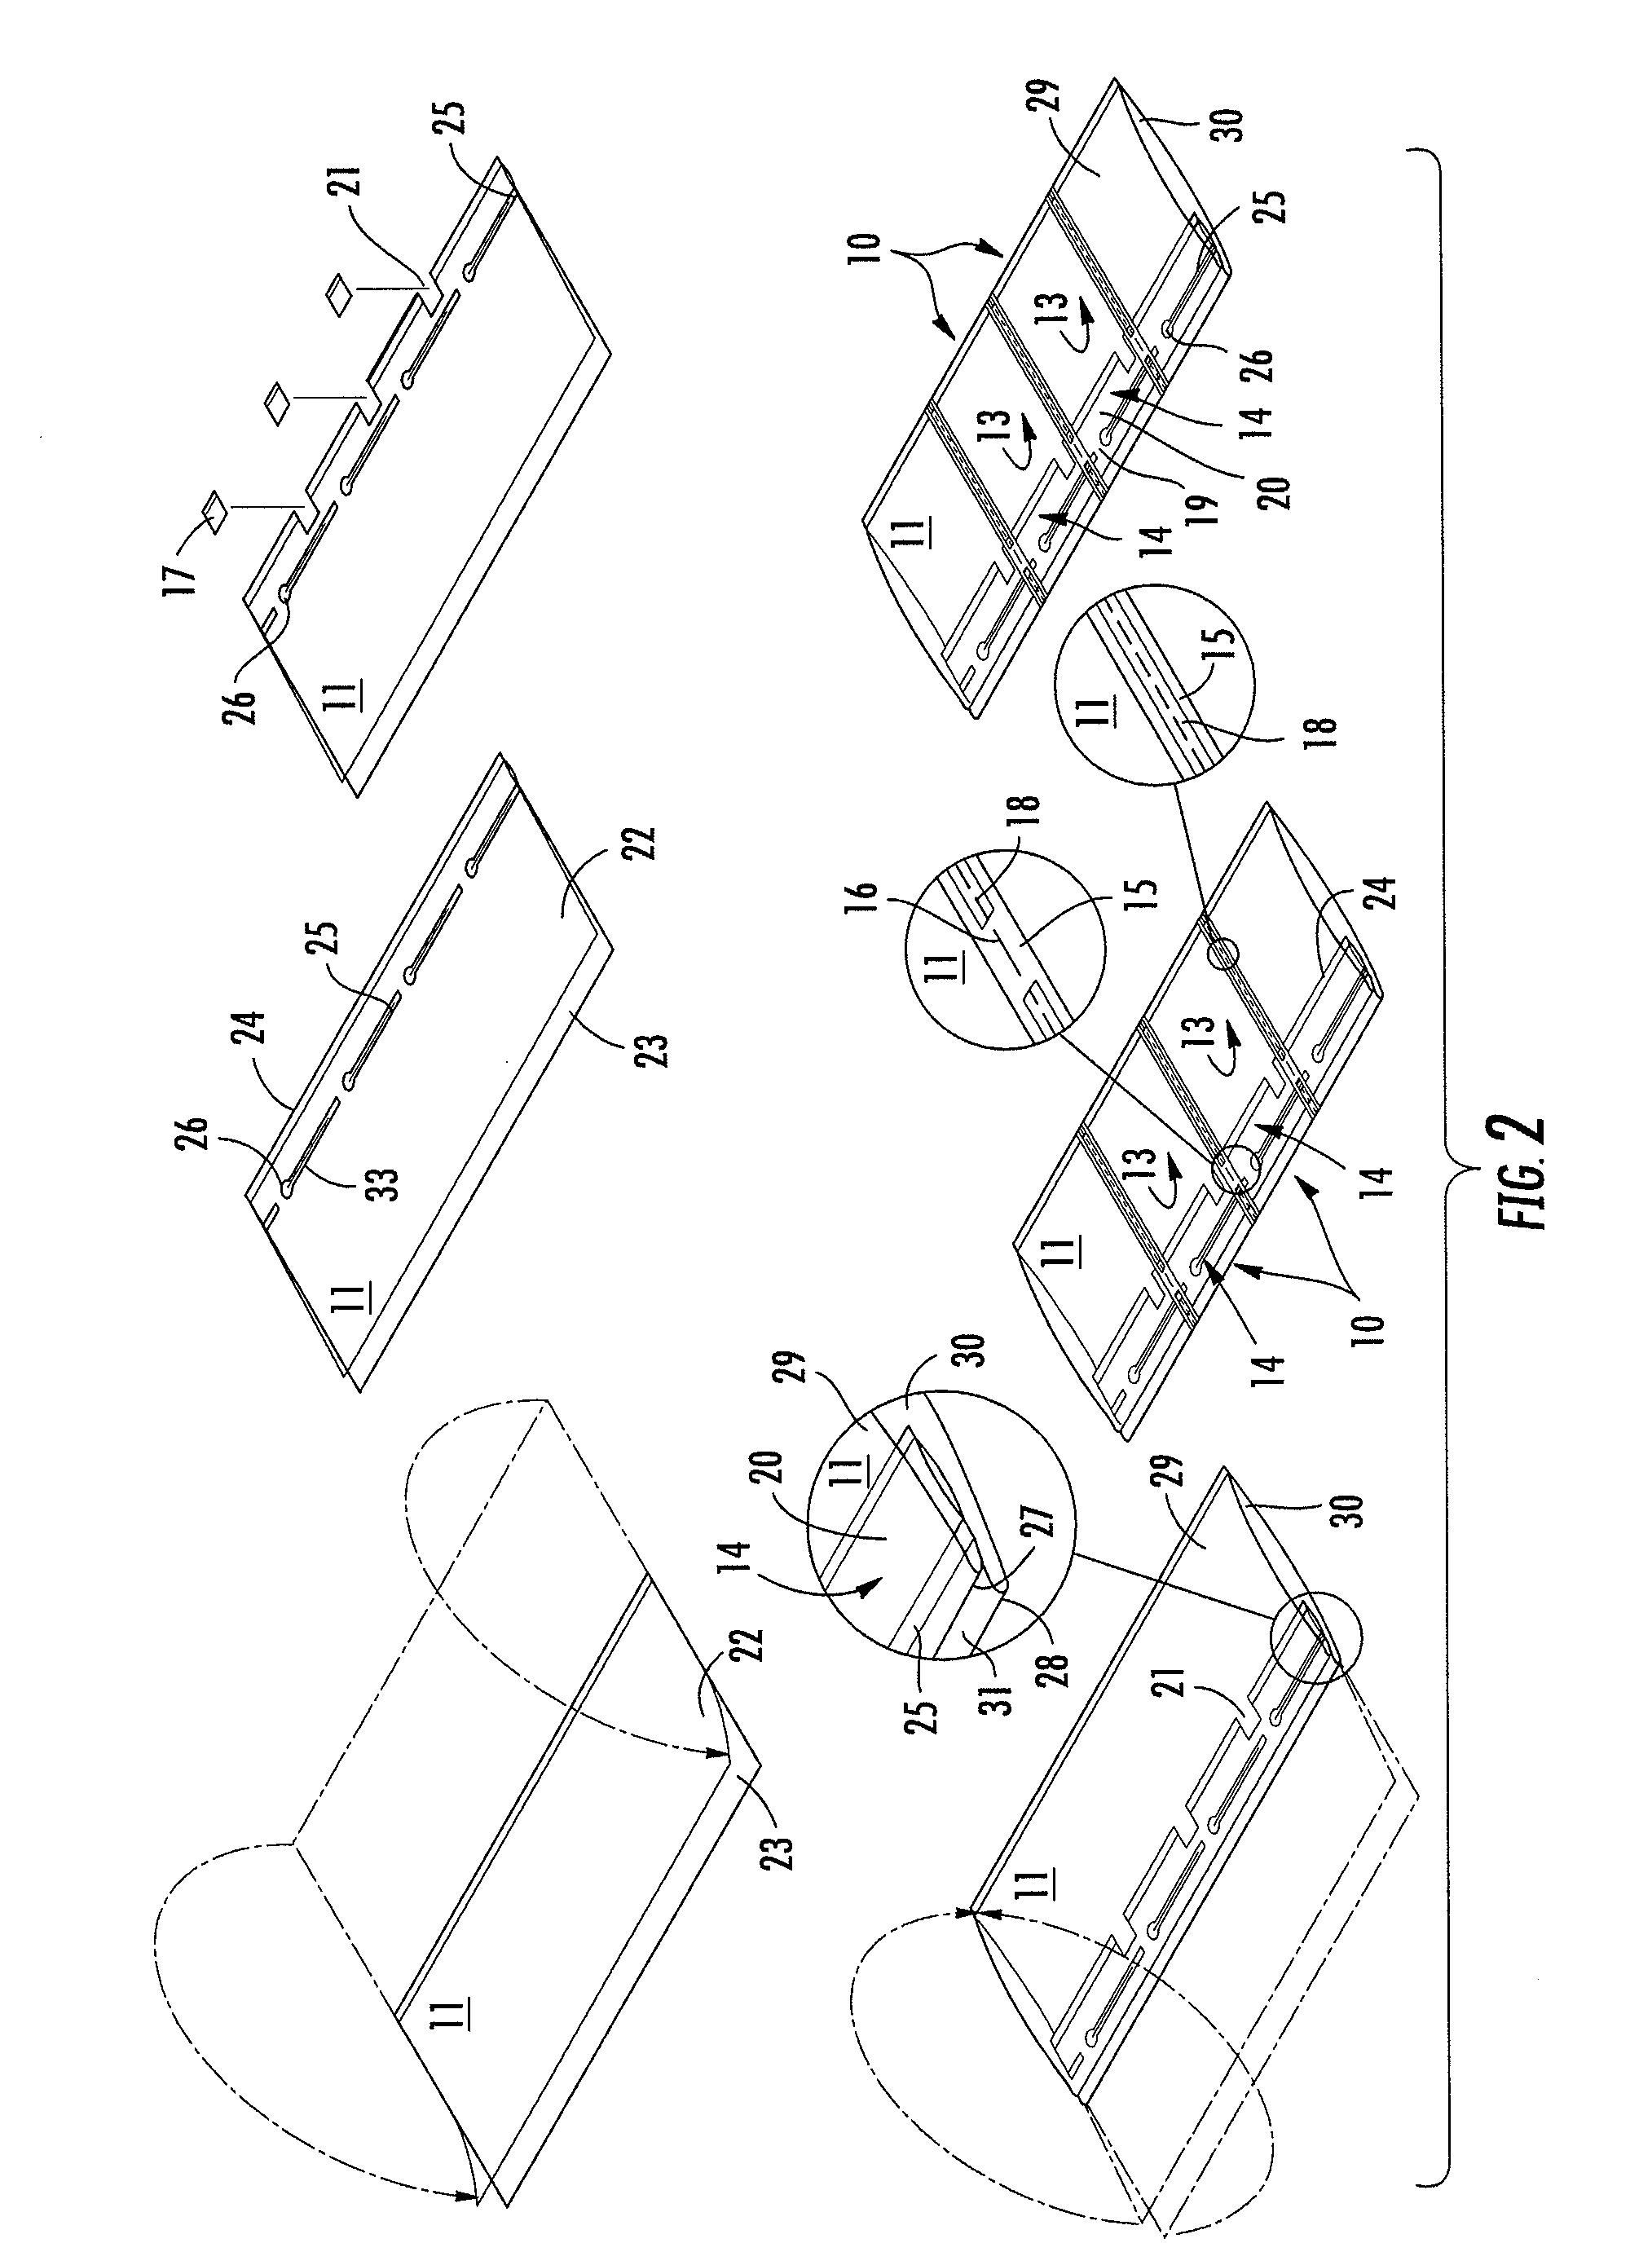 Inflatable Structure for Packaging and Associated Apparatus and Method